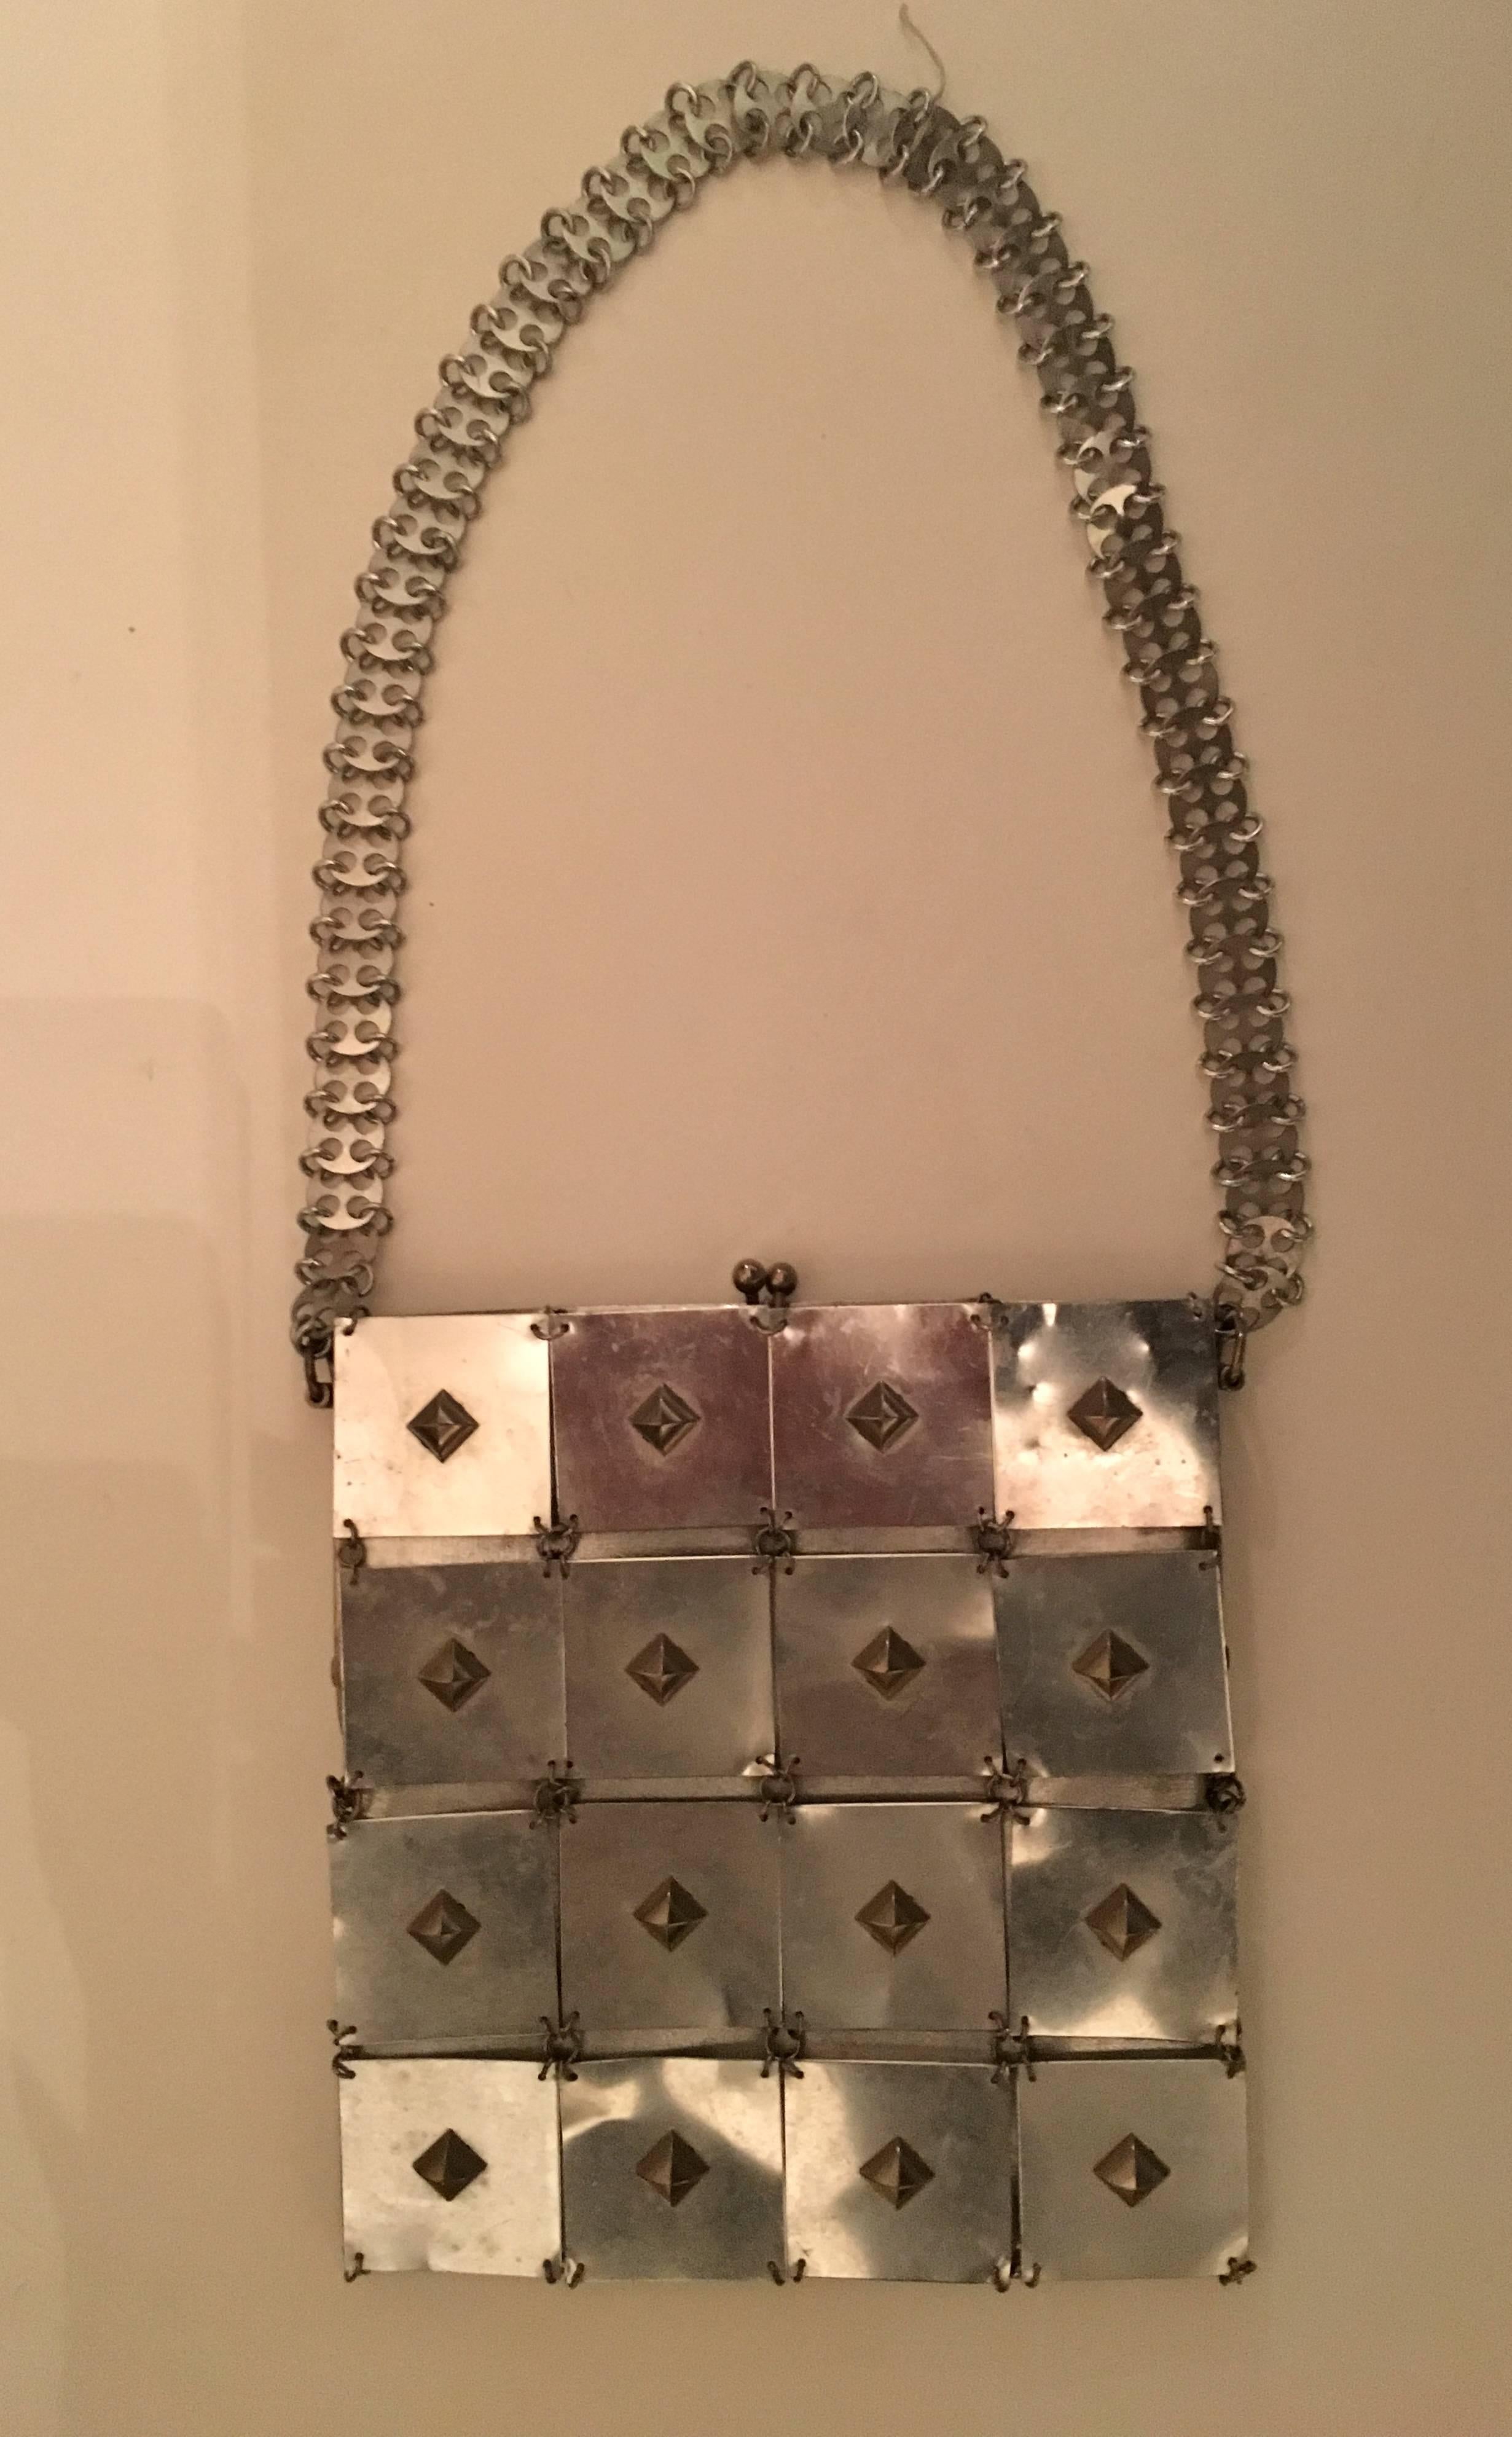 Paco Rabanne Rare and iconic metal bag.In excellent vintage condition, circa 1968. Museum quality Piece. Assembly of openwork metal plates with diamond shaped silver metal on the front .
Paco Rabanne bag in squared  metallic silver pieces on silver